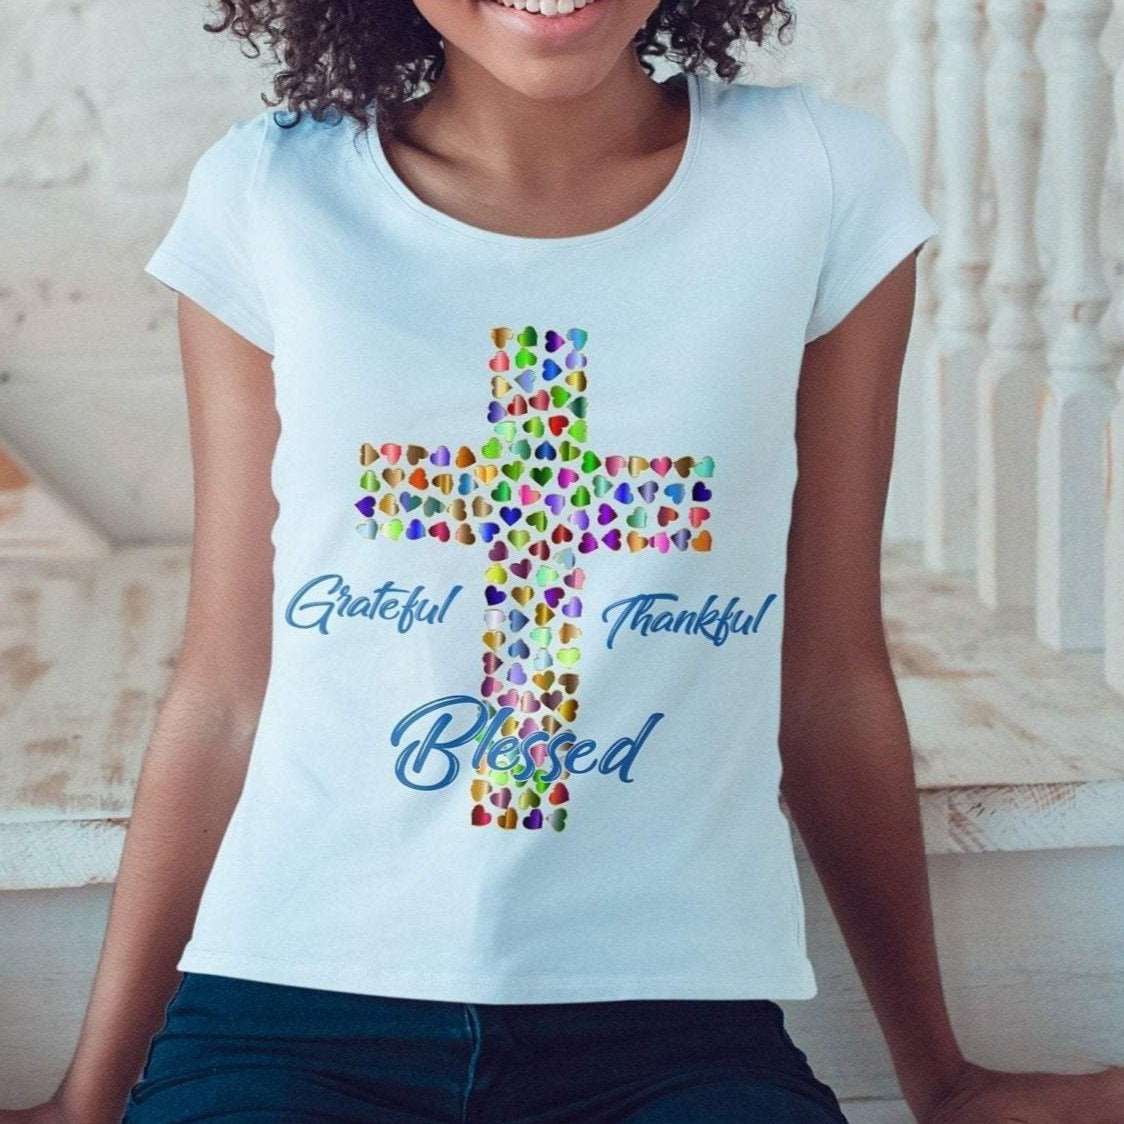 Grateful, Thankful, Blessed Graphic T-Shirt - My Custom Tee Party